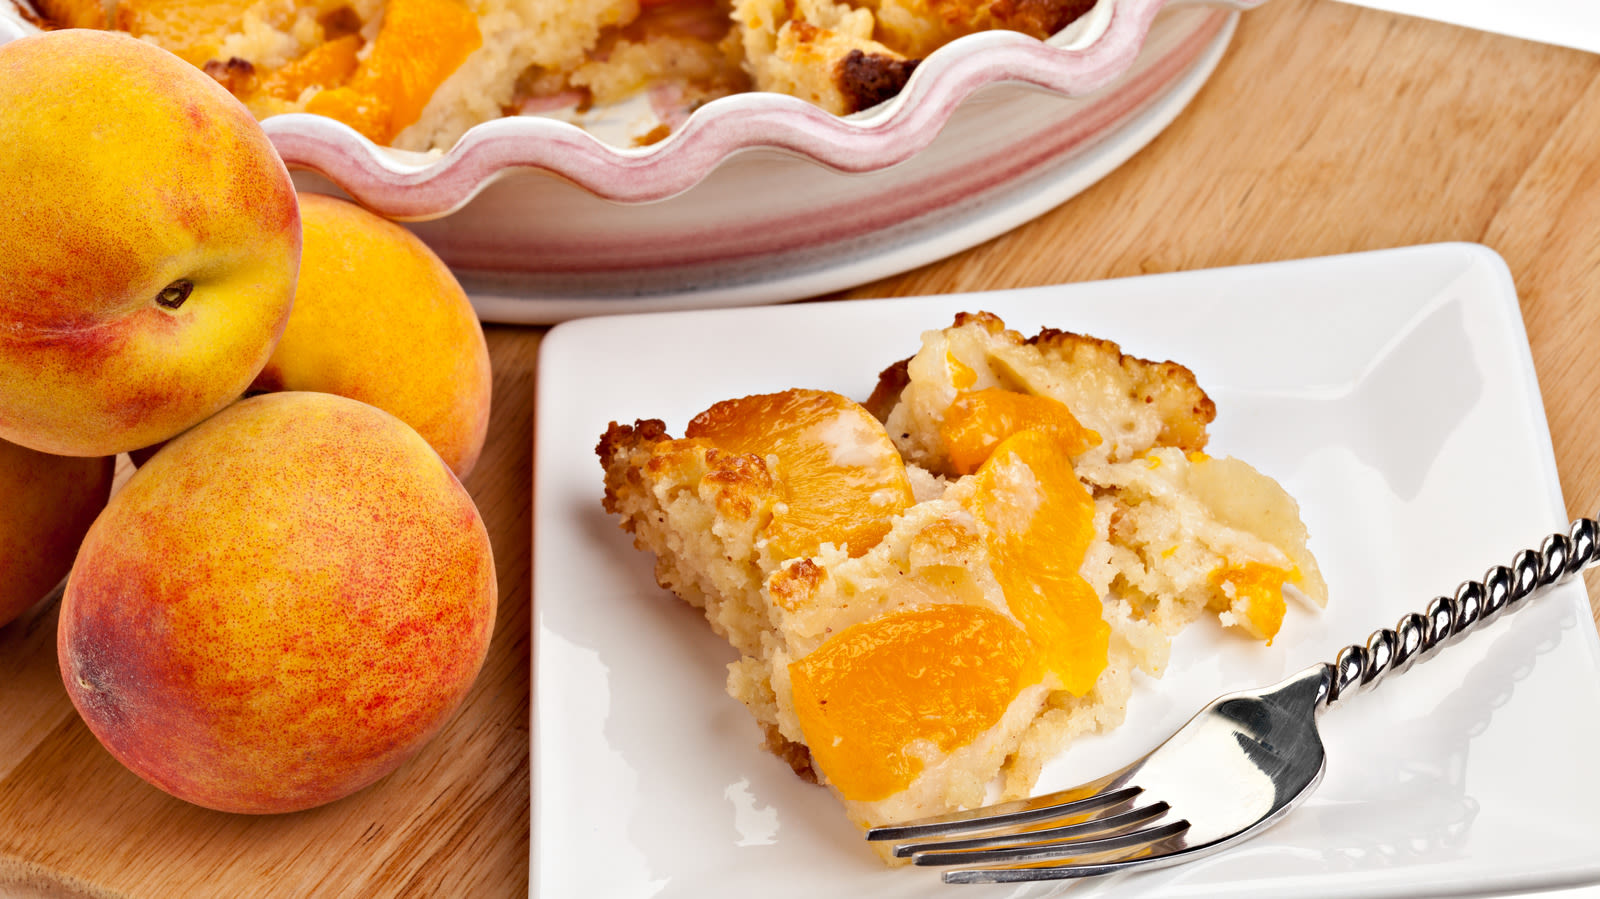 Canned, Fresh, Or Frozen Peaches: Does It Matter For Your Cobbler Filling?